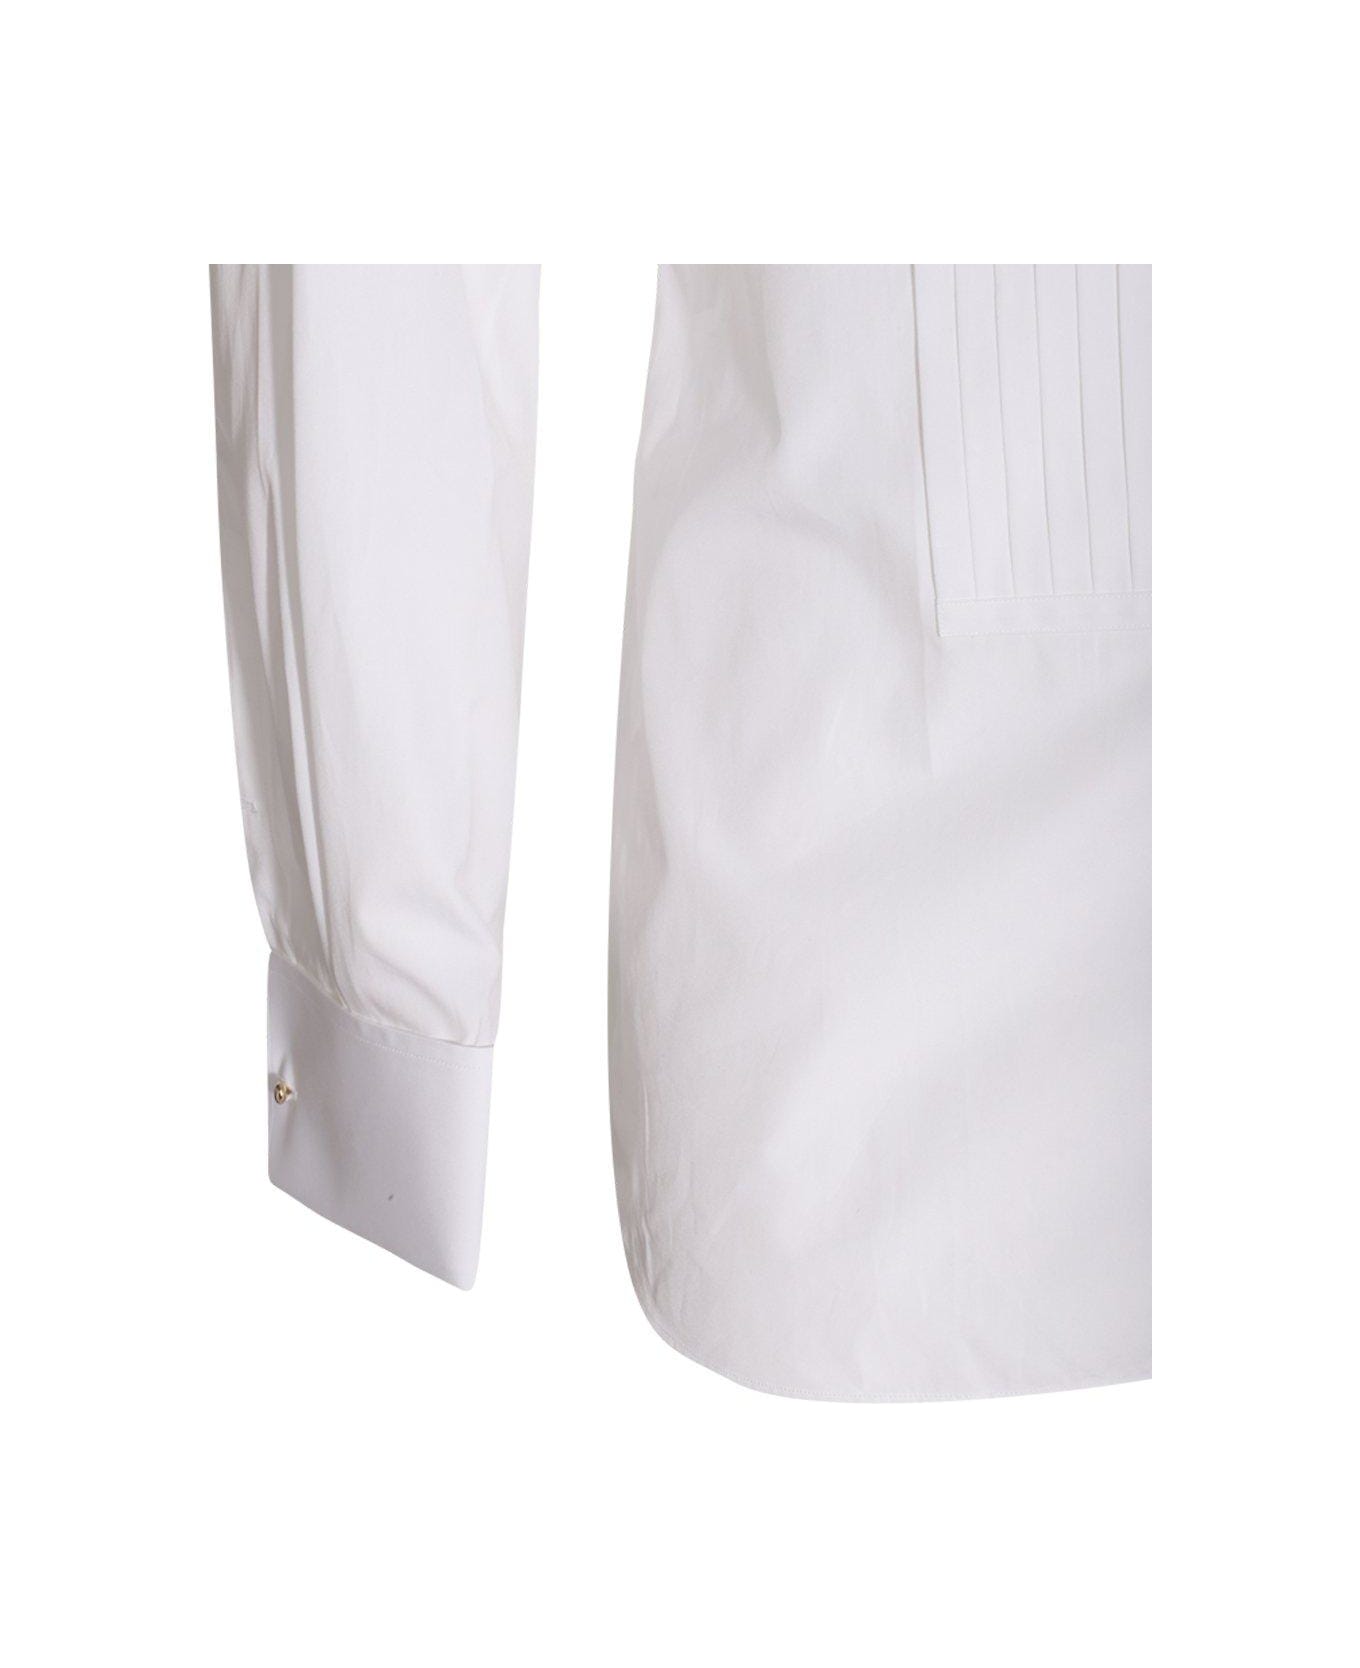 Tom Ford Pleat-detailed Long-sleeved Shirt